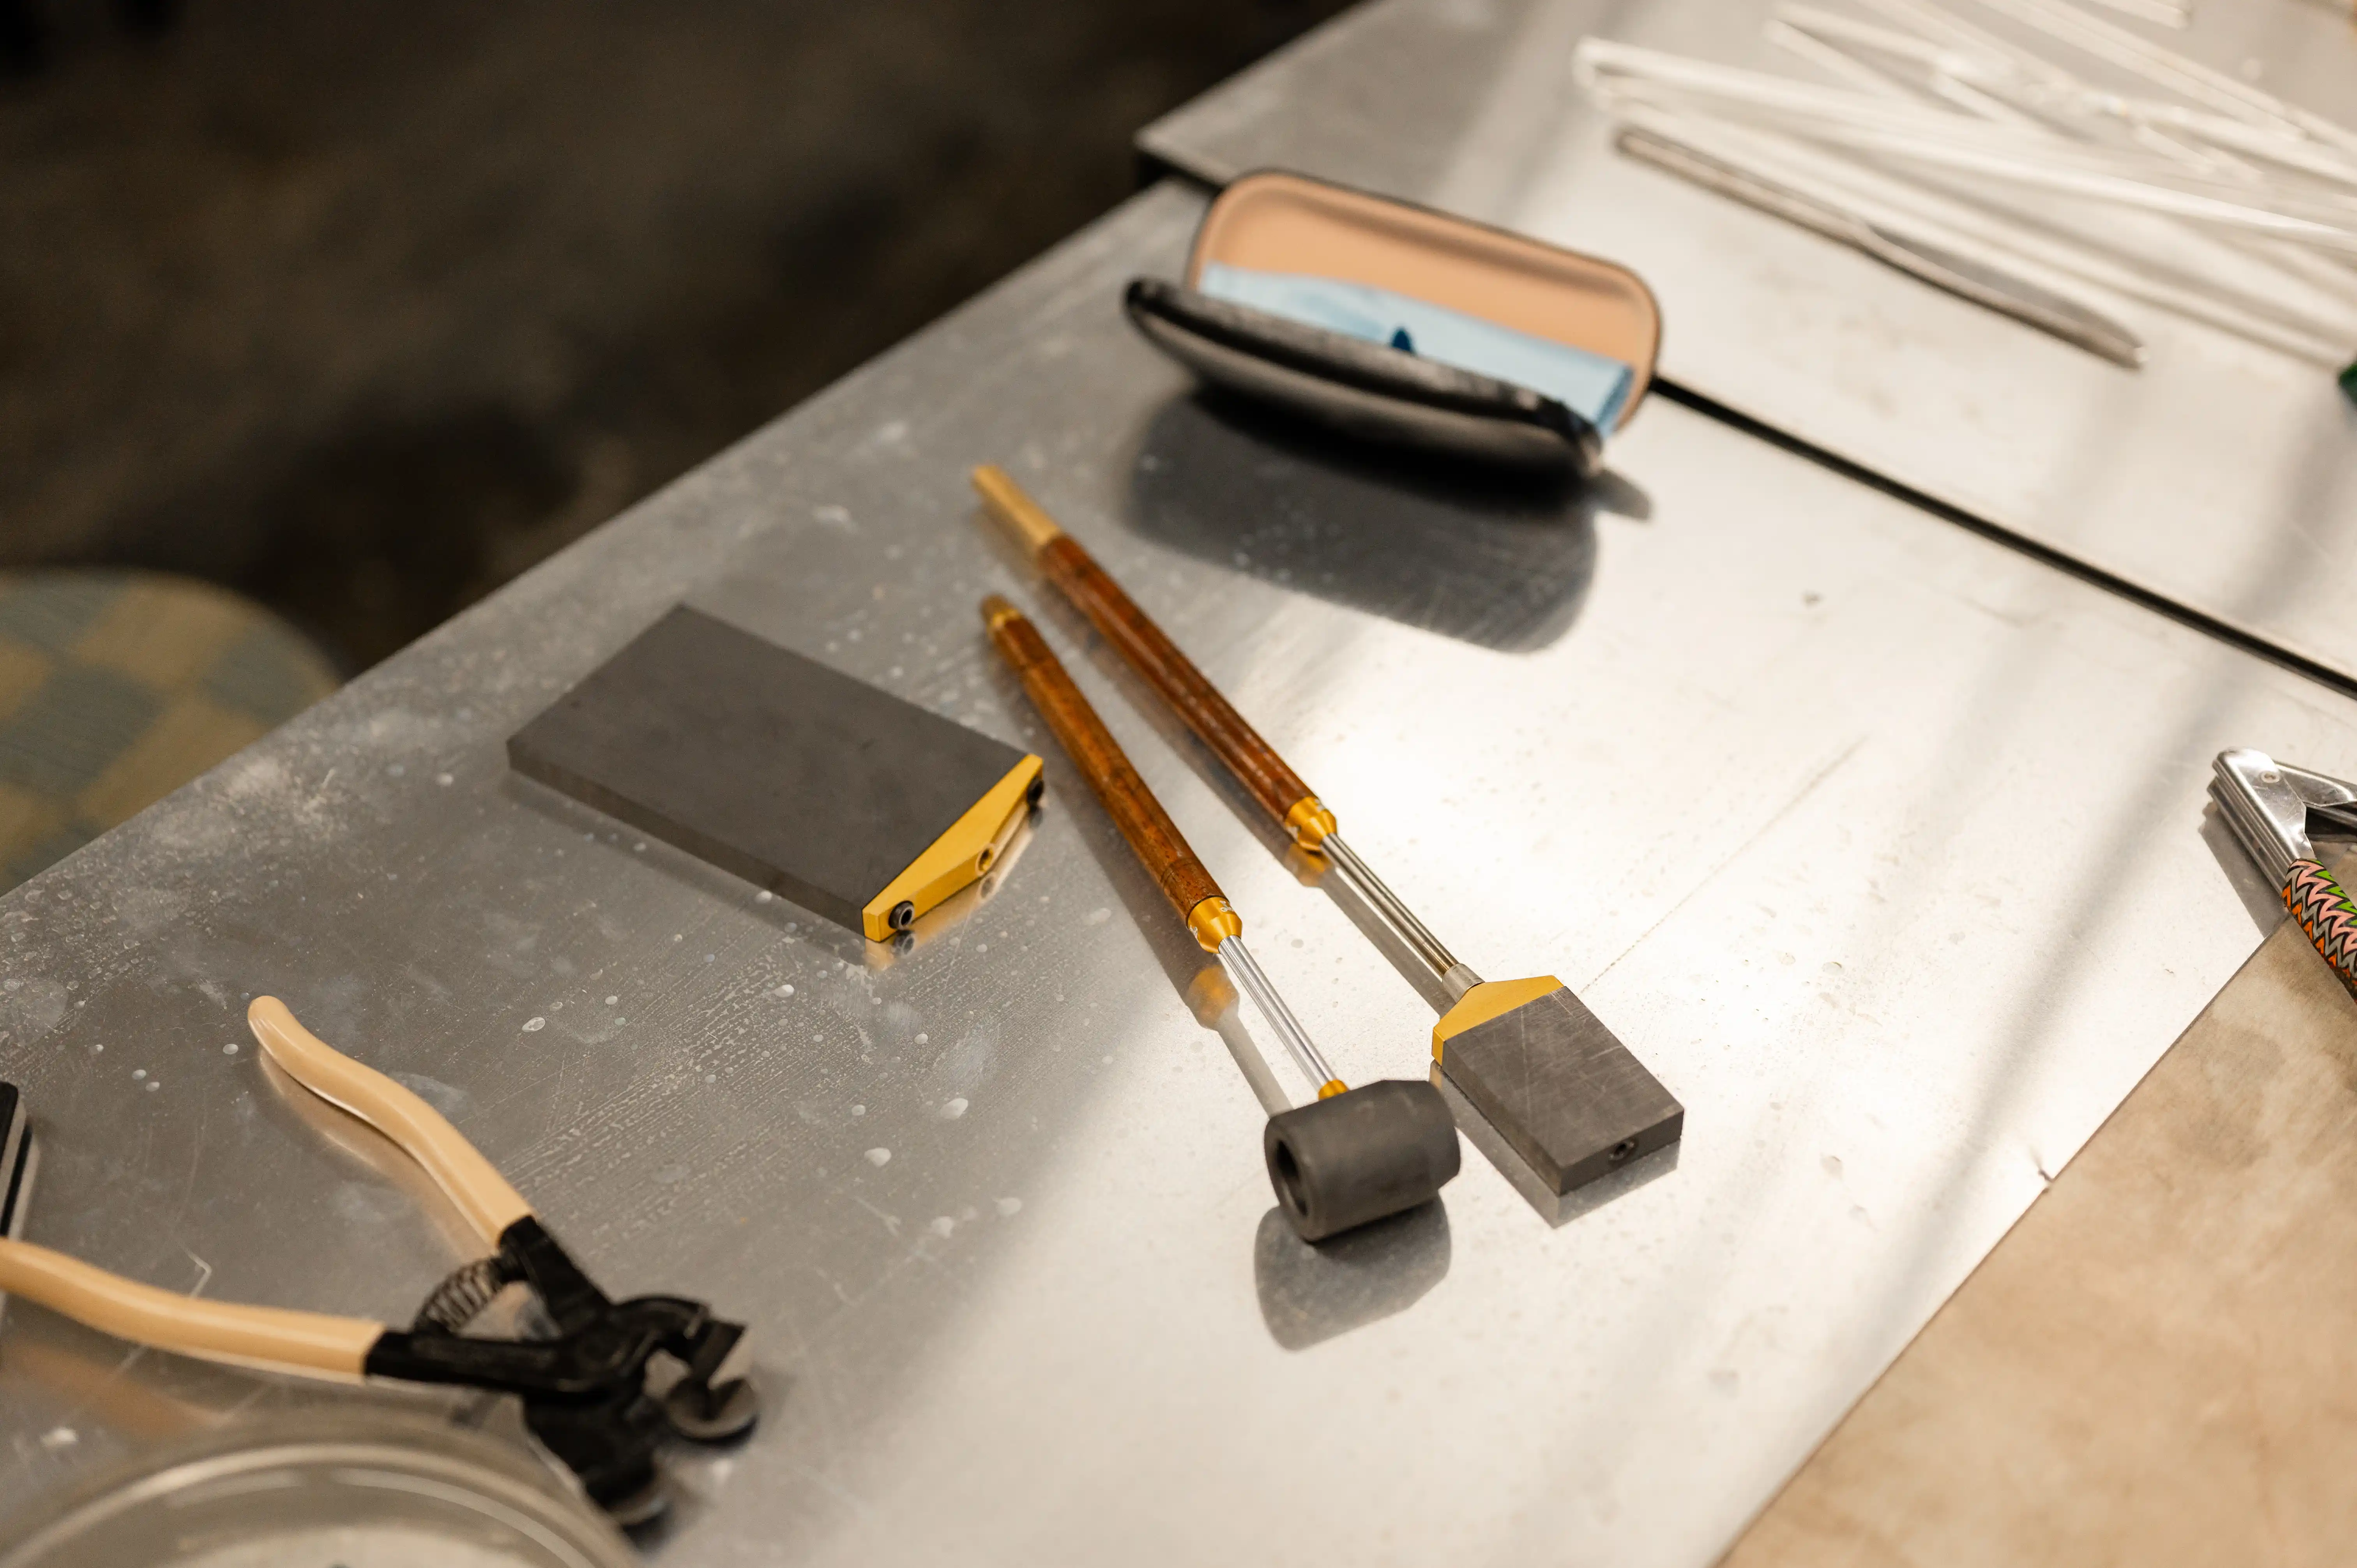 Various jewelry-making tools laid out on a workbench, including hammers, pliers, and a whetstone.